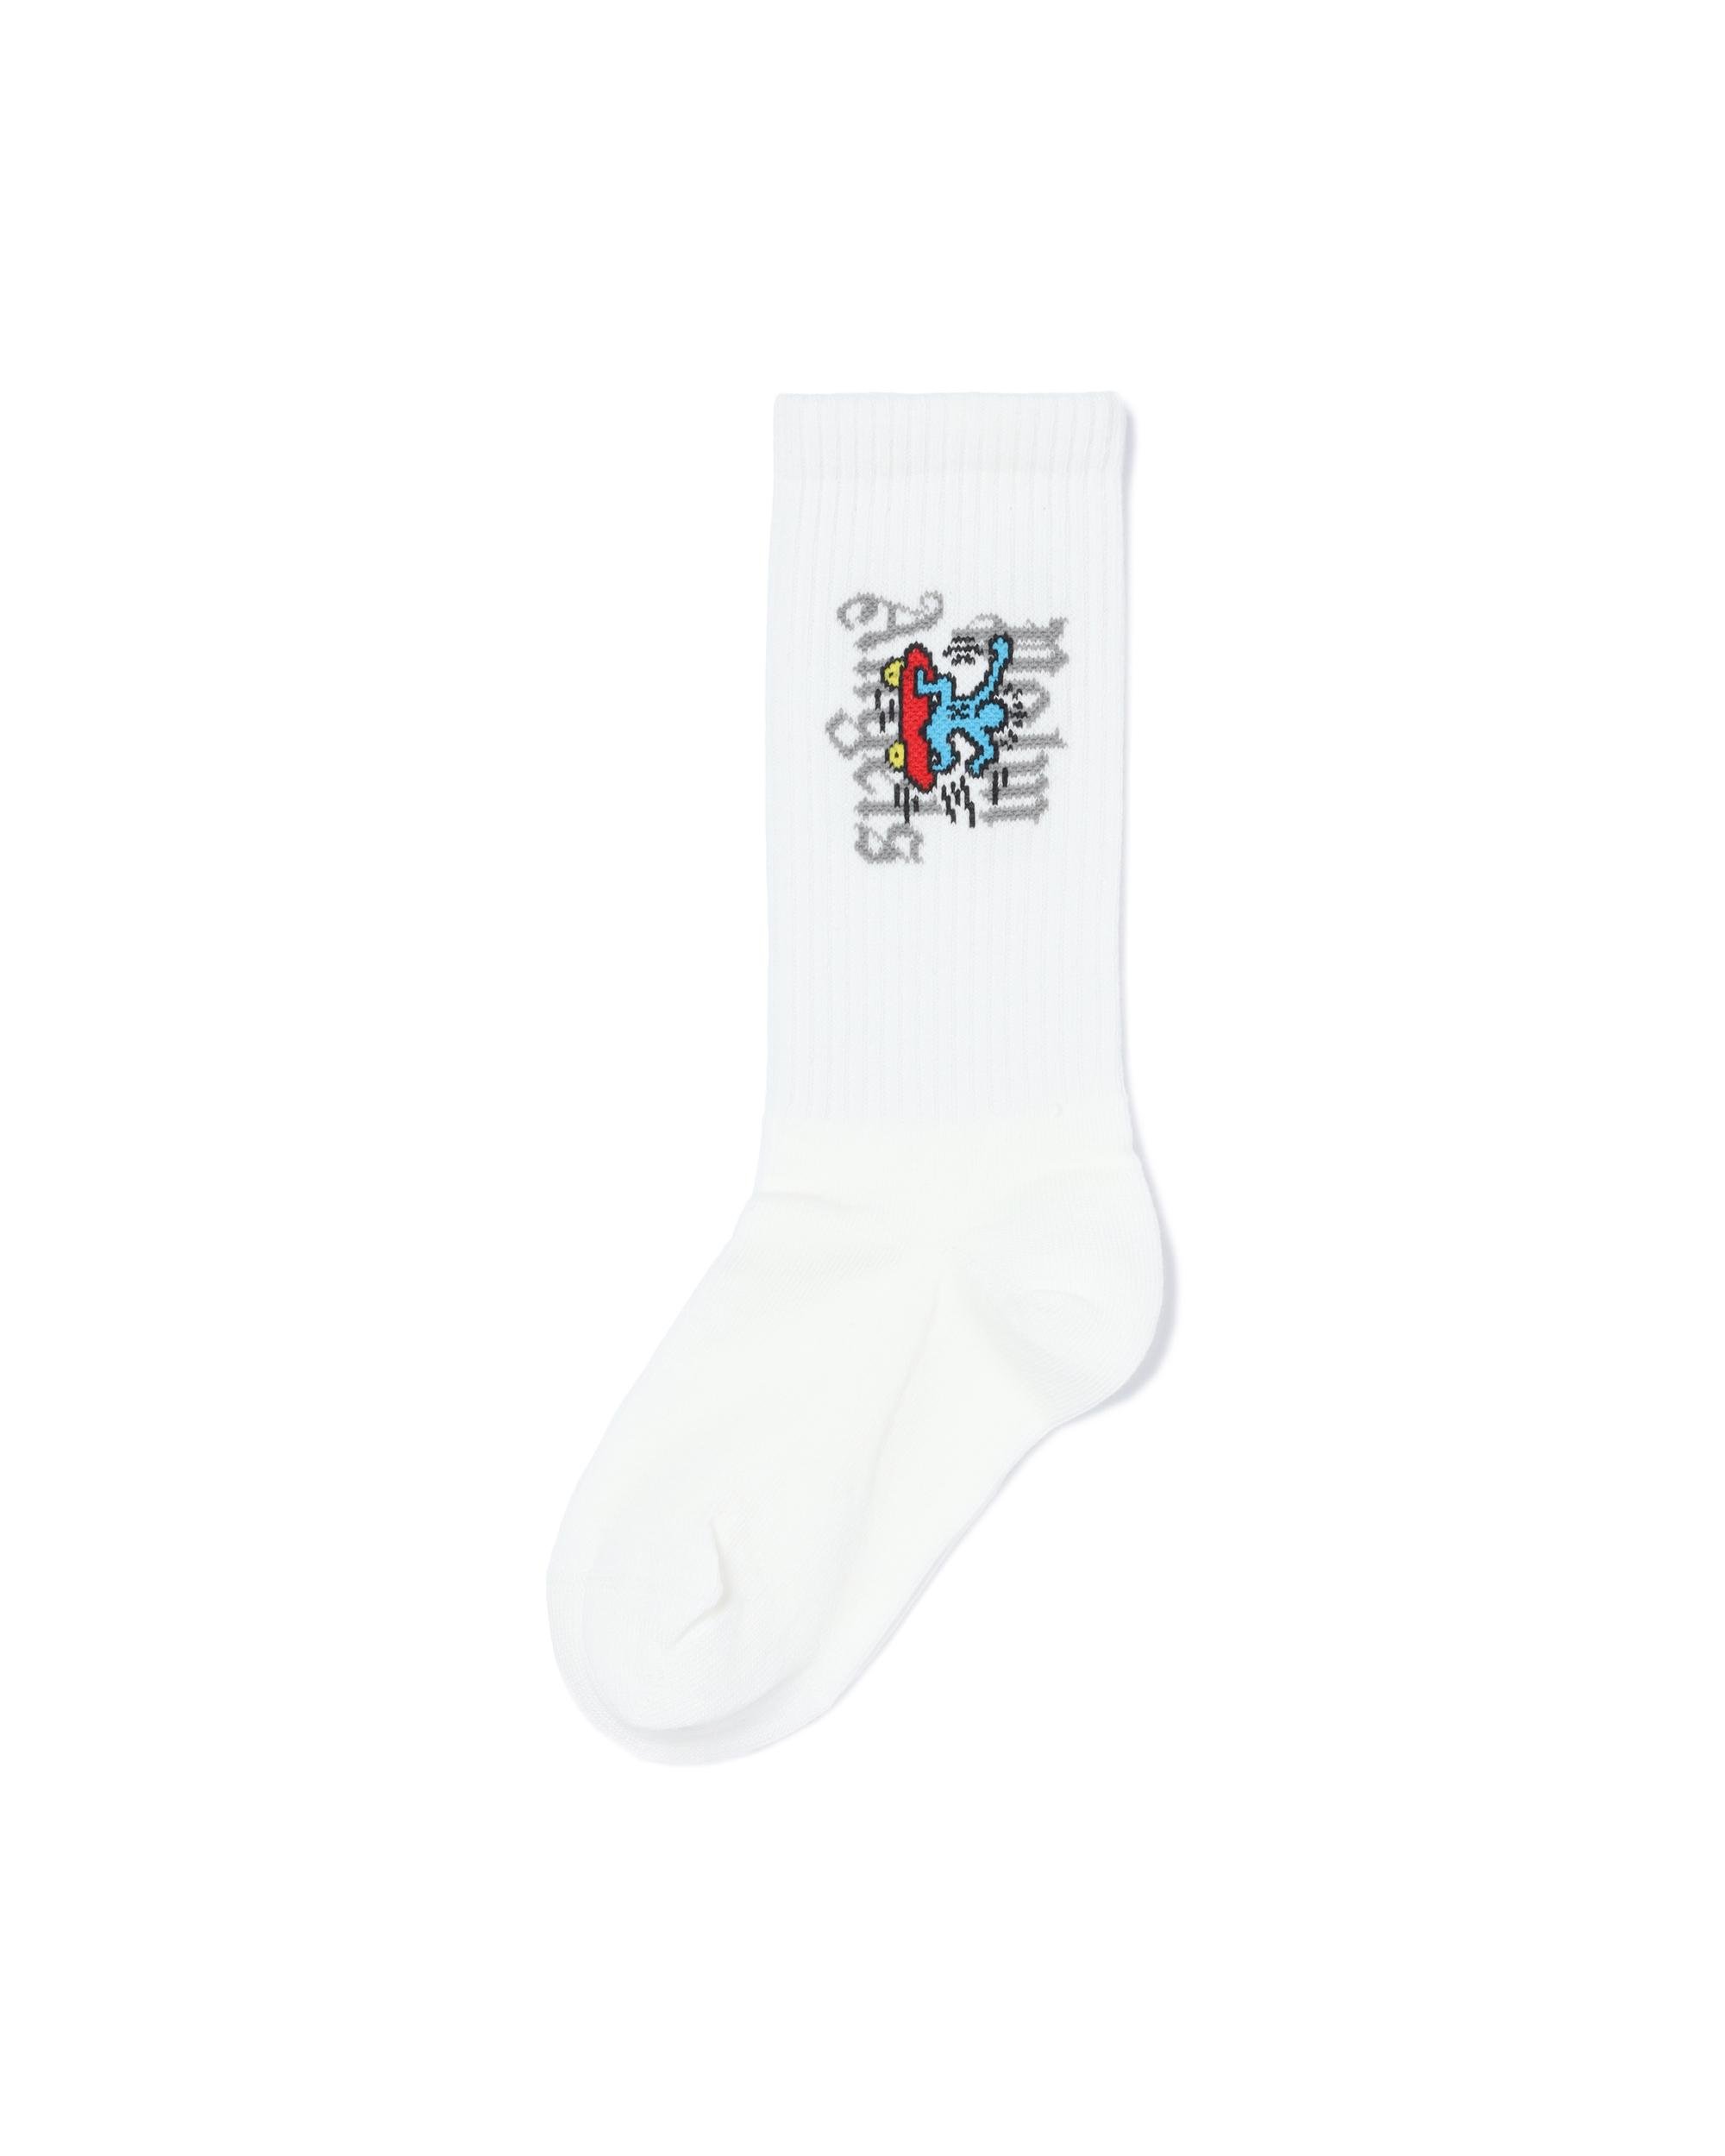 Kids x Keith Haring socks by PALM ANGELS